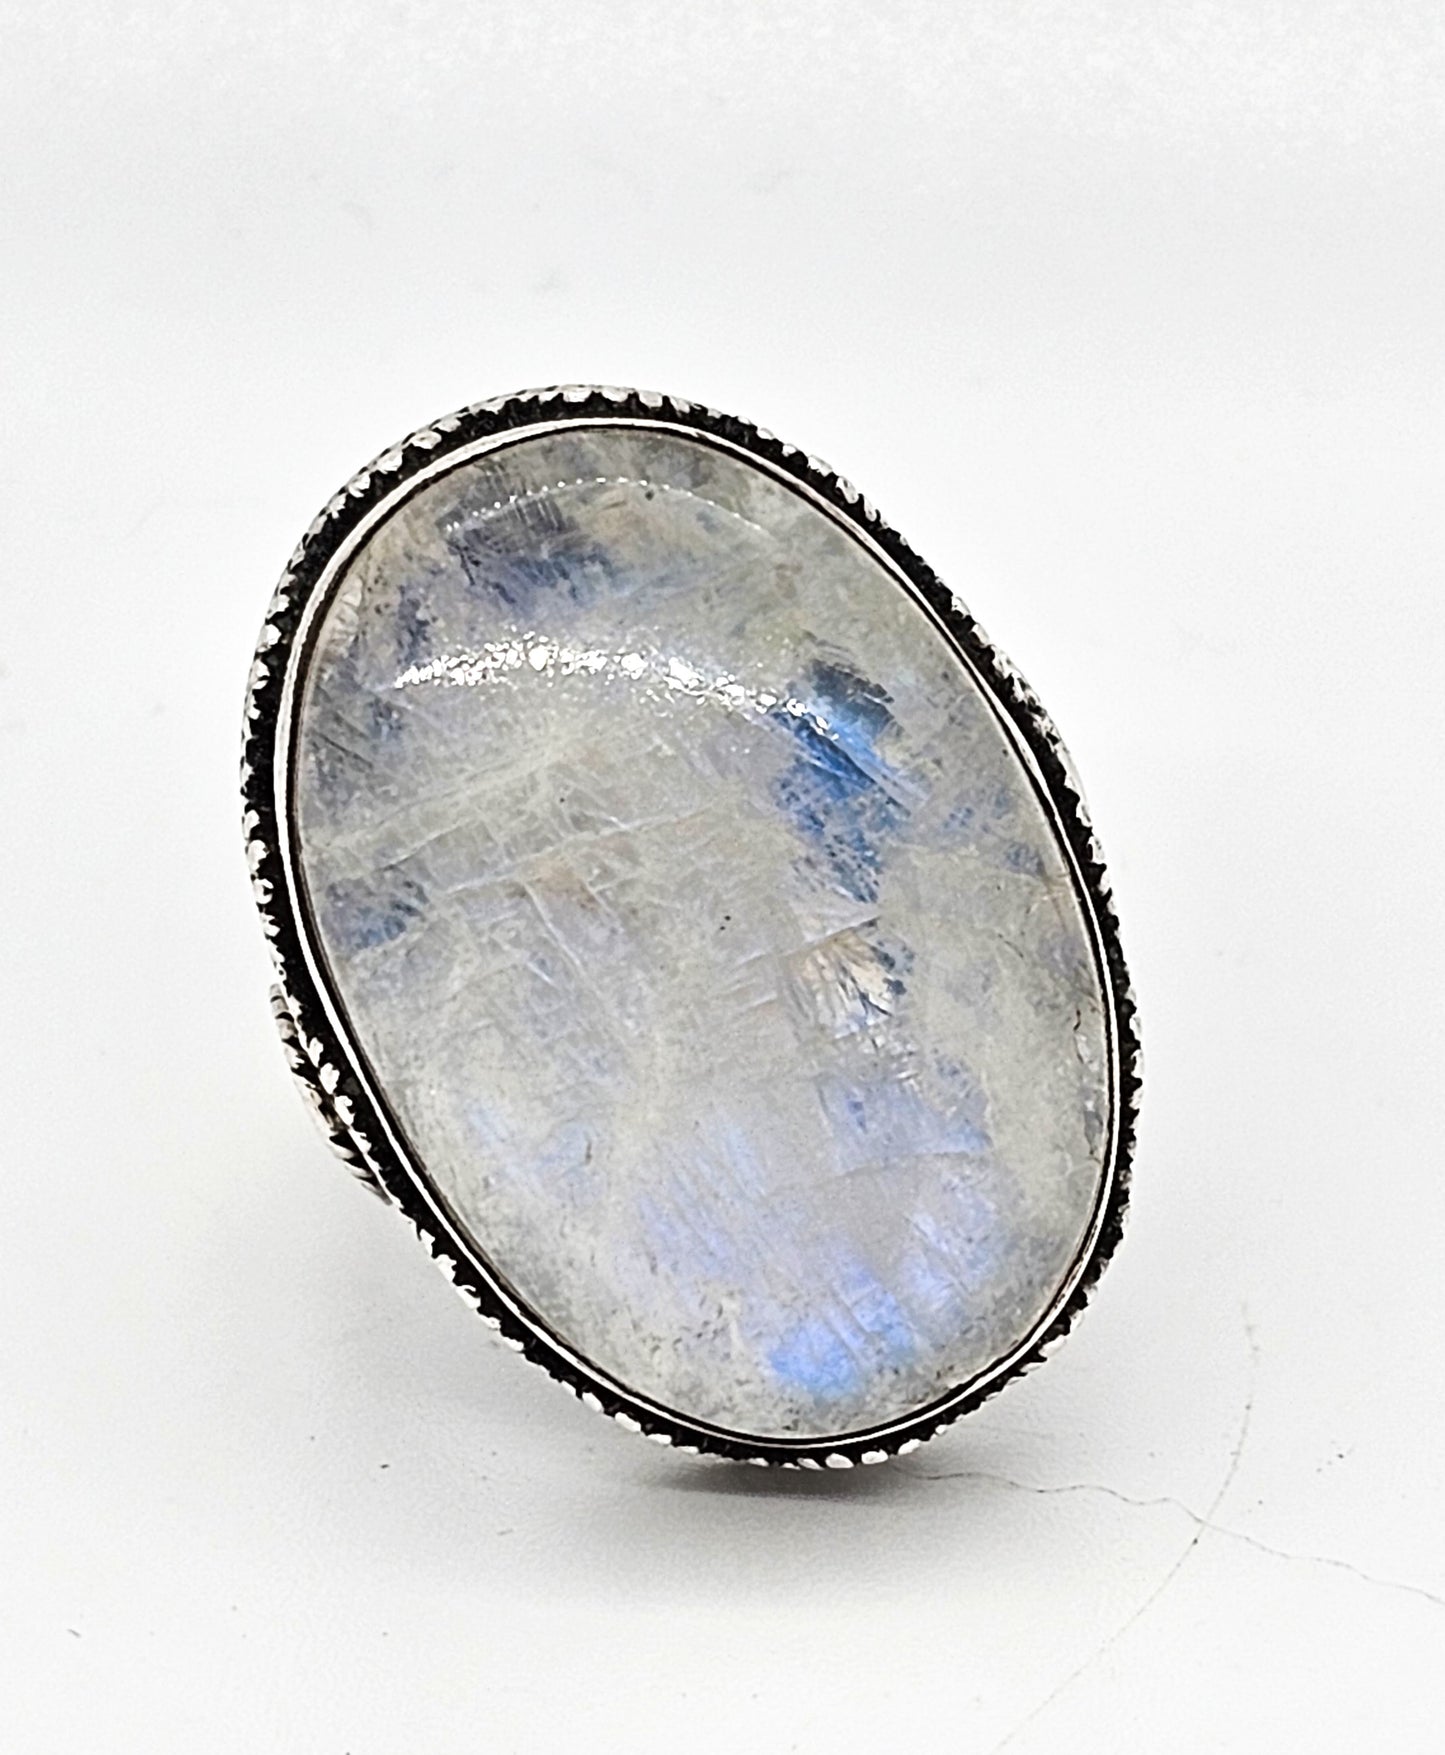 XL Rainbow Blue moonstone bali Balinese tribal spiral sterling silver ring size 9